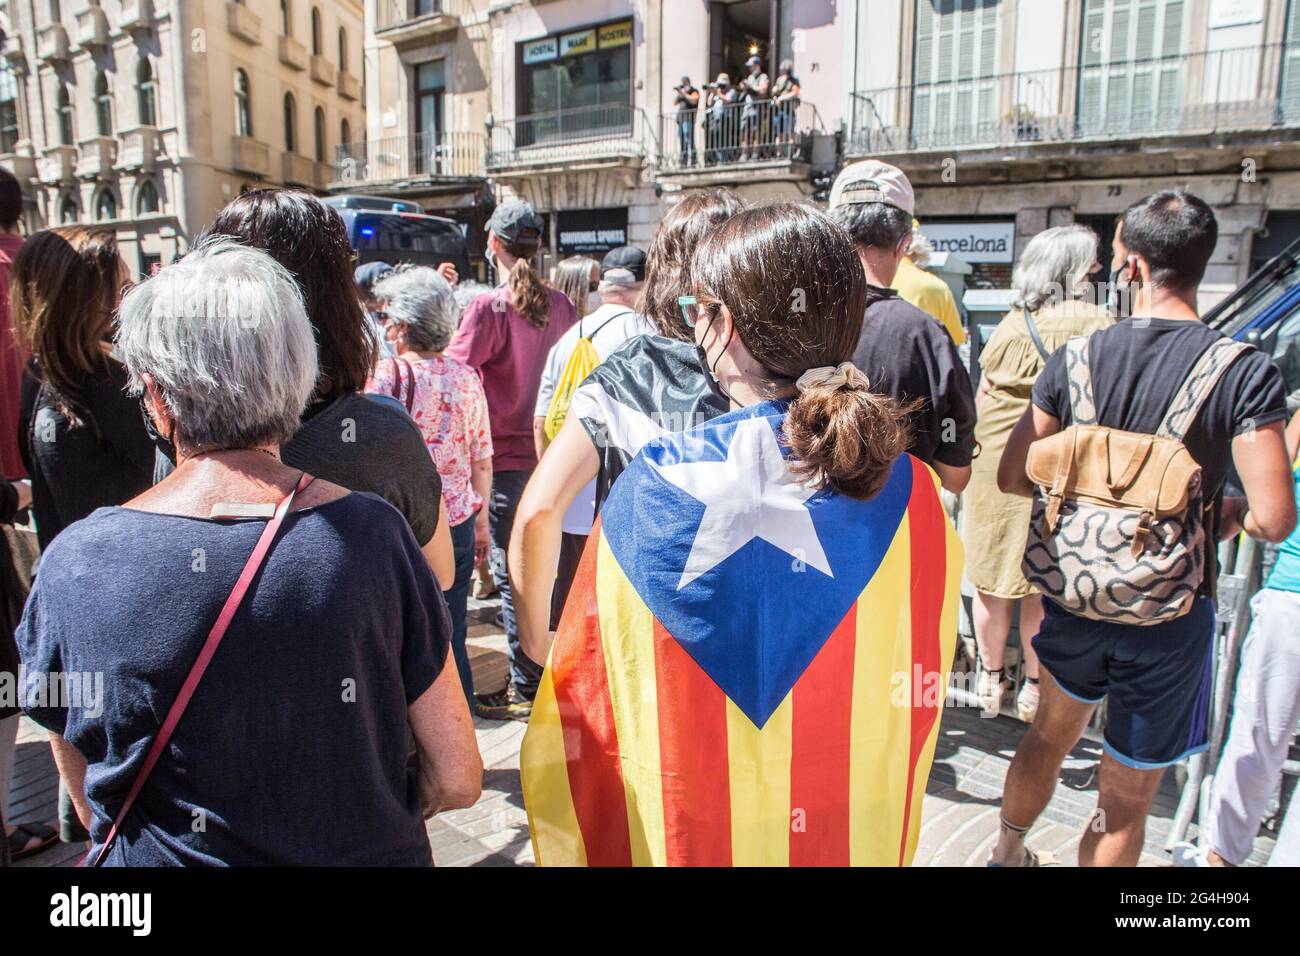 A protester seen with a Catalan independence flag during the demonstration.Hundreds of Catalan independentistas have demonstrated in Las Ramblas in Barcelona, in front of the Gran Teatre del Liceu (Great Theater of the Lyceum), shielded by many policemen, to protest the visit of the President of the Spanish Government, Pedro Sanchez, who has held a conference entitled 'Reunion: a project for the future for all of Spain', with the expectation of an imminent granting of pardons for the independence leaders in prison. The protesters protested to denounce that the repression against the Catalan in Stock Photo